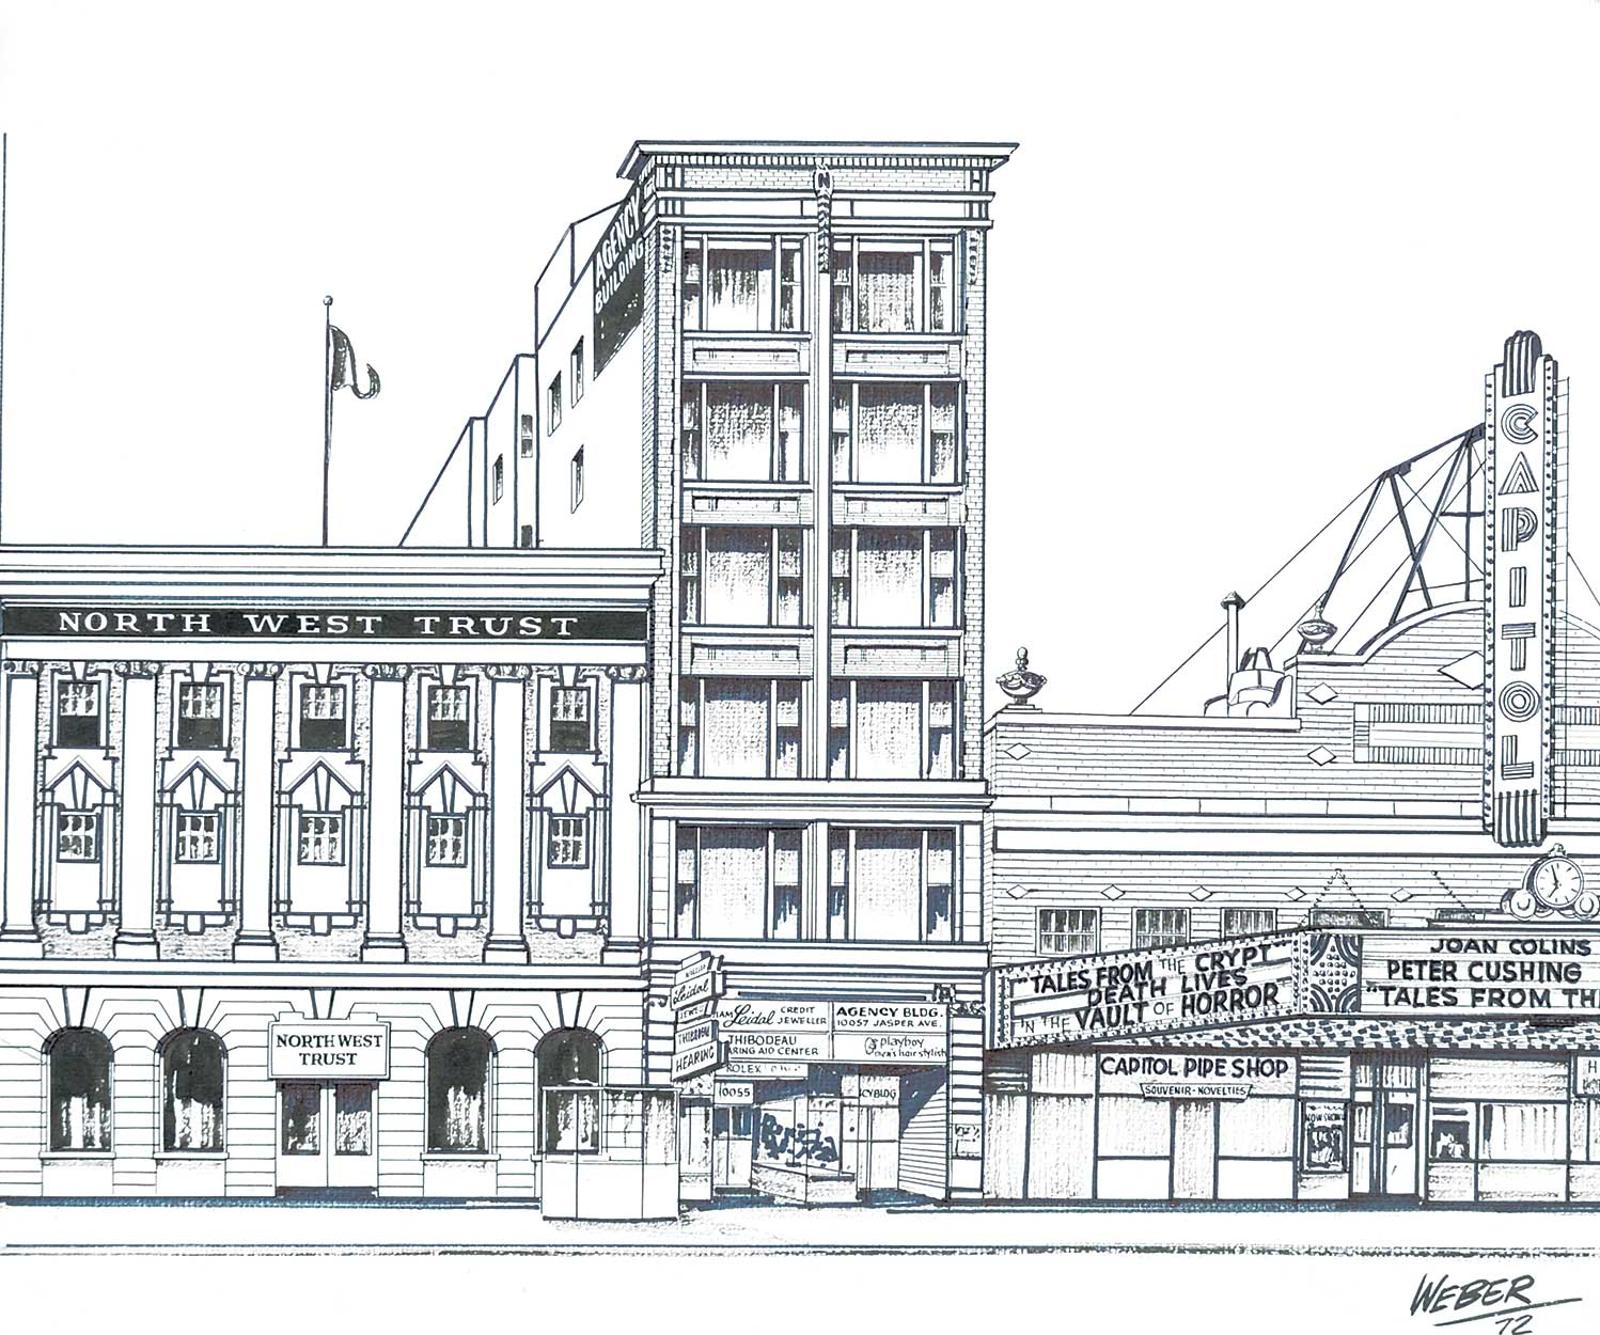 George Weber (1907-2002) - Agency Building and Capitol Theatre Before Demolition